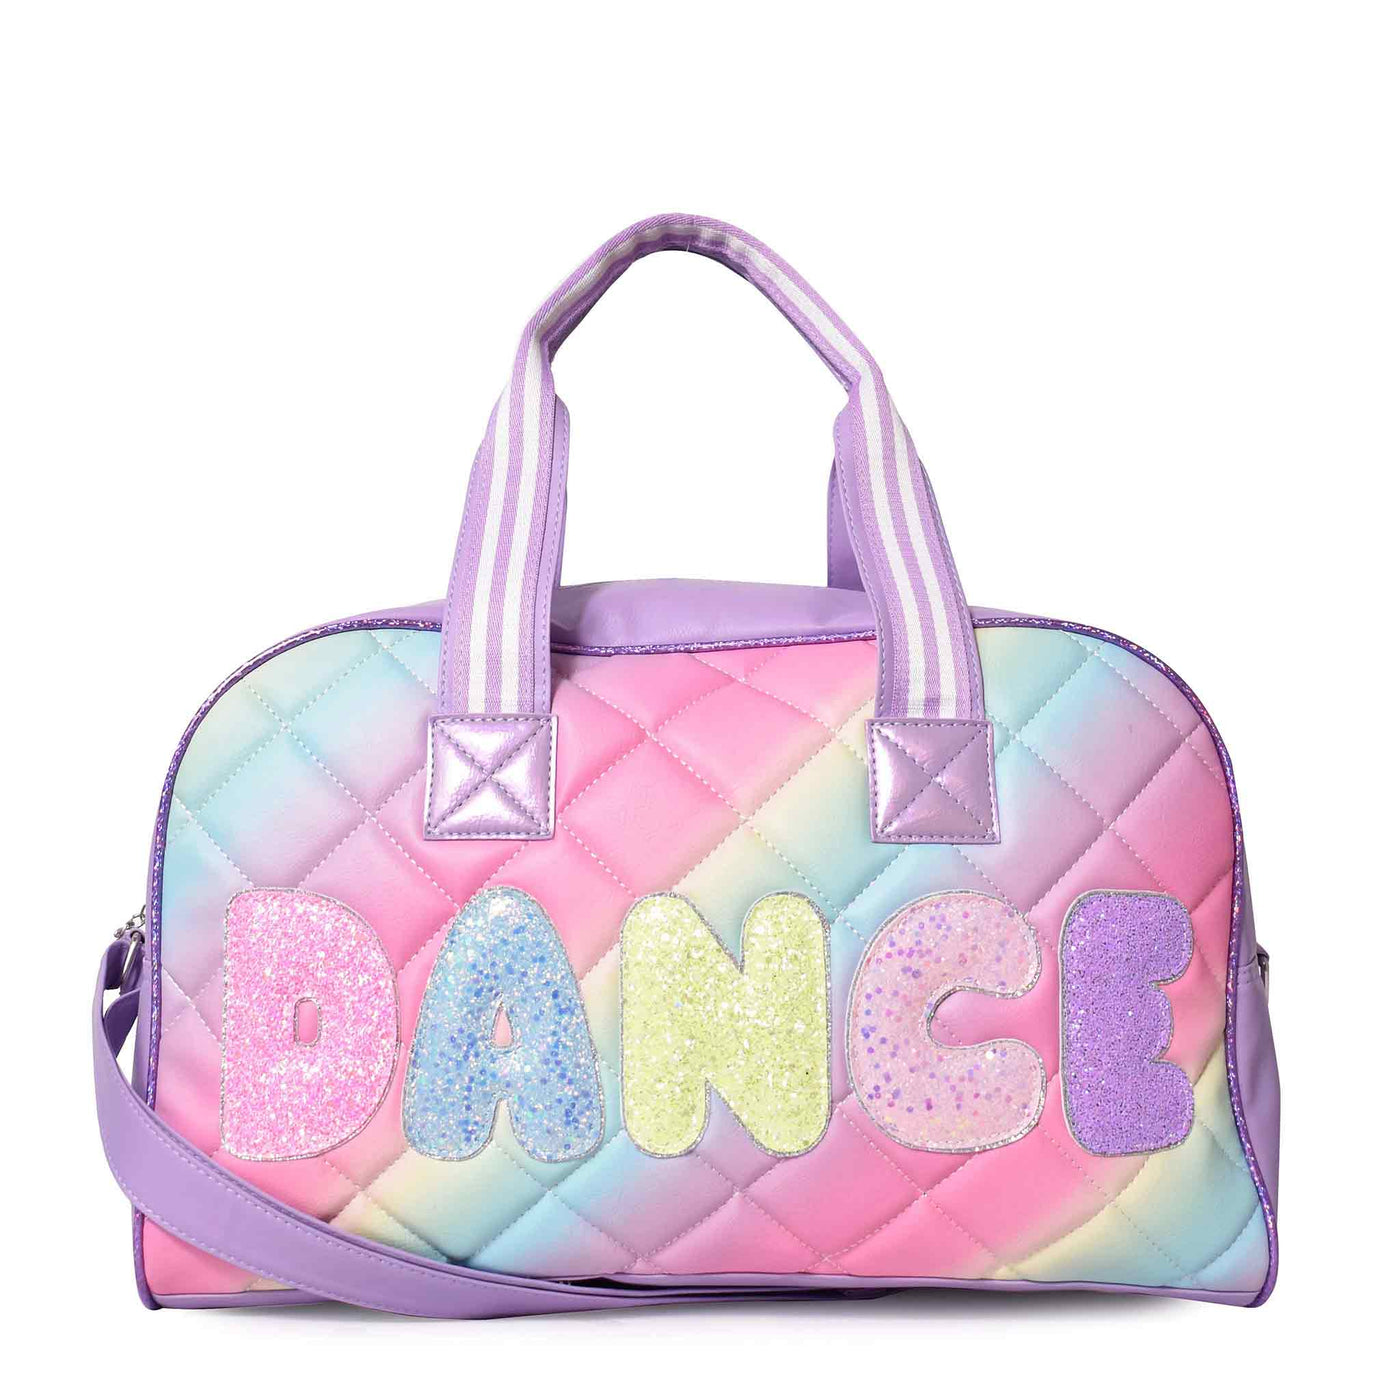 Miss Gwen's OMG Accessories - 'Dance' Quilted Ombre Large Duffle Bag